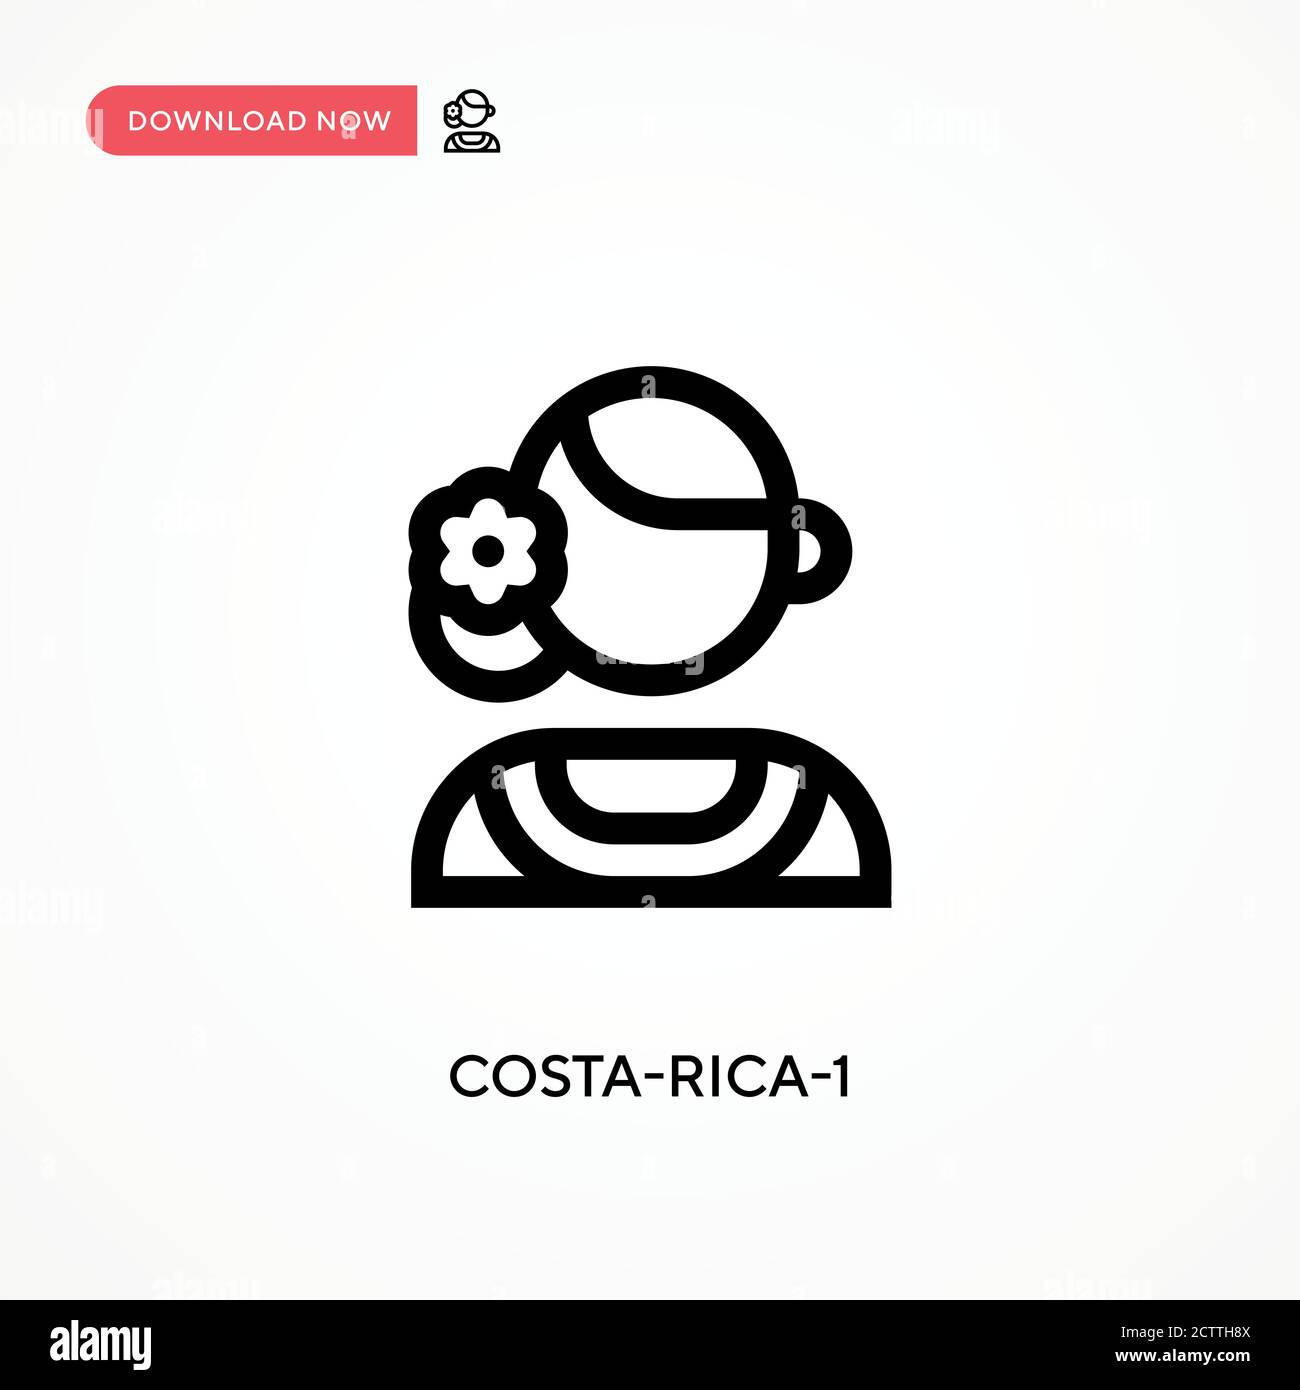 Costa-rica-1 vector icon. . Modern, simple flat vector illustration for web site or mobile app Stock Vector